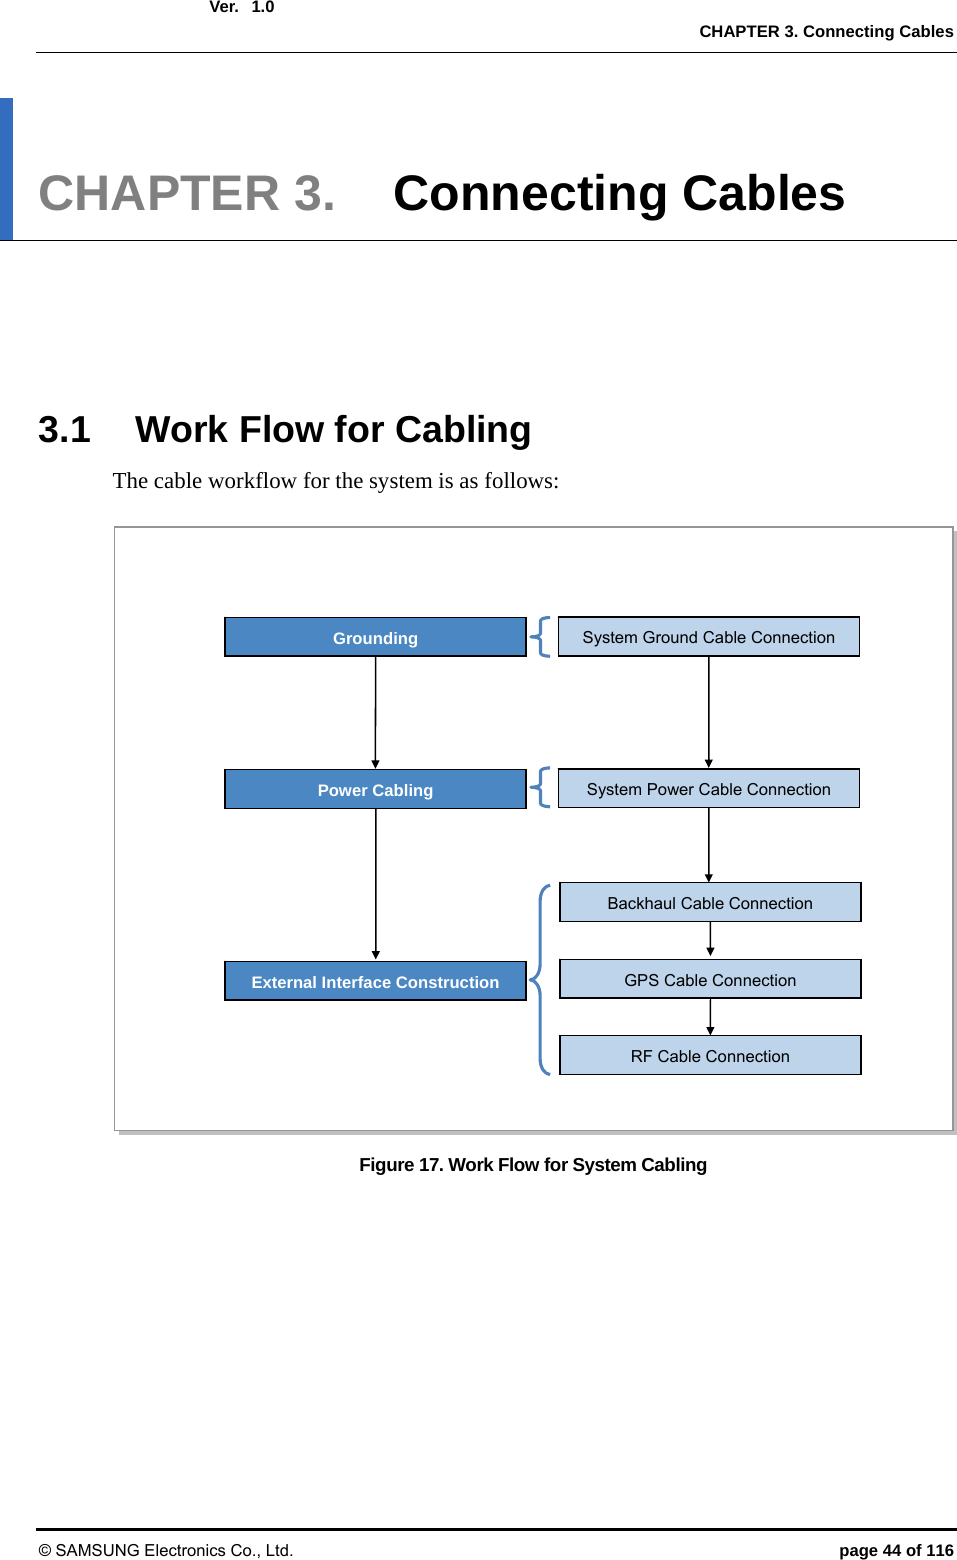  Ver.   CHAPTER 3. Connecting Cables © SAMSUNG Electronics Co., Ltd.  page 44 of 116 1.0CHAPTER 3.  Connecting Cables      3.1  Work Flow for Cabling The cable workflow for the system is as follows:    Figure 17. Work Flow for System Cabling Grounding Power Cabling   System Ground Cable Connection External Interface Construction Backhaul Cable Connection GPS Cable Connection RF Cable Connection System Power Cable Connection 